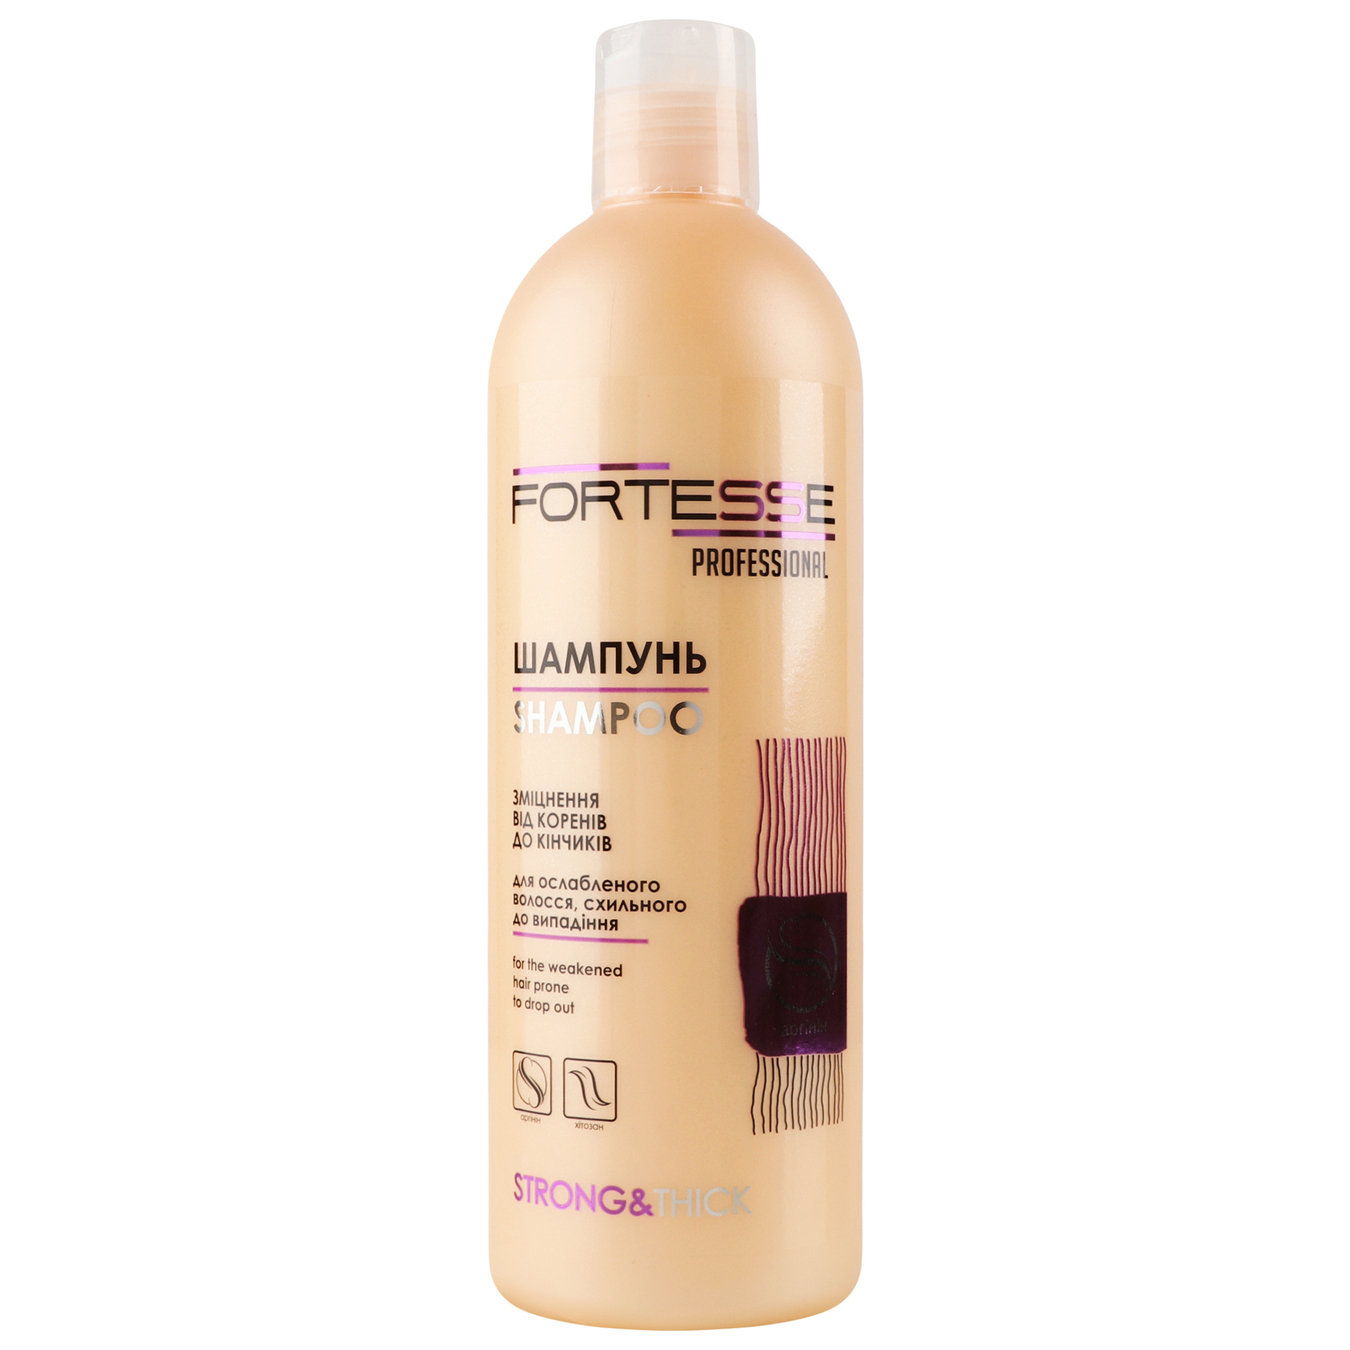 Fortesse Professional strong&thick strengthening shampoo for weakened hair prone to hair loss 400ml